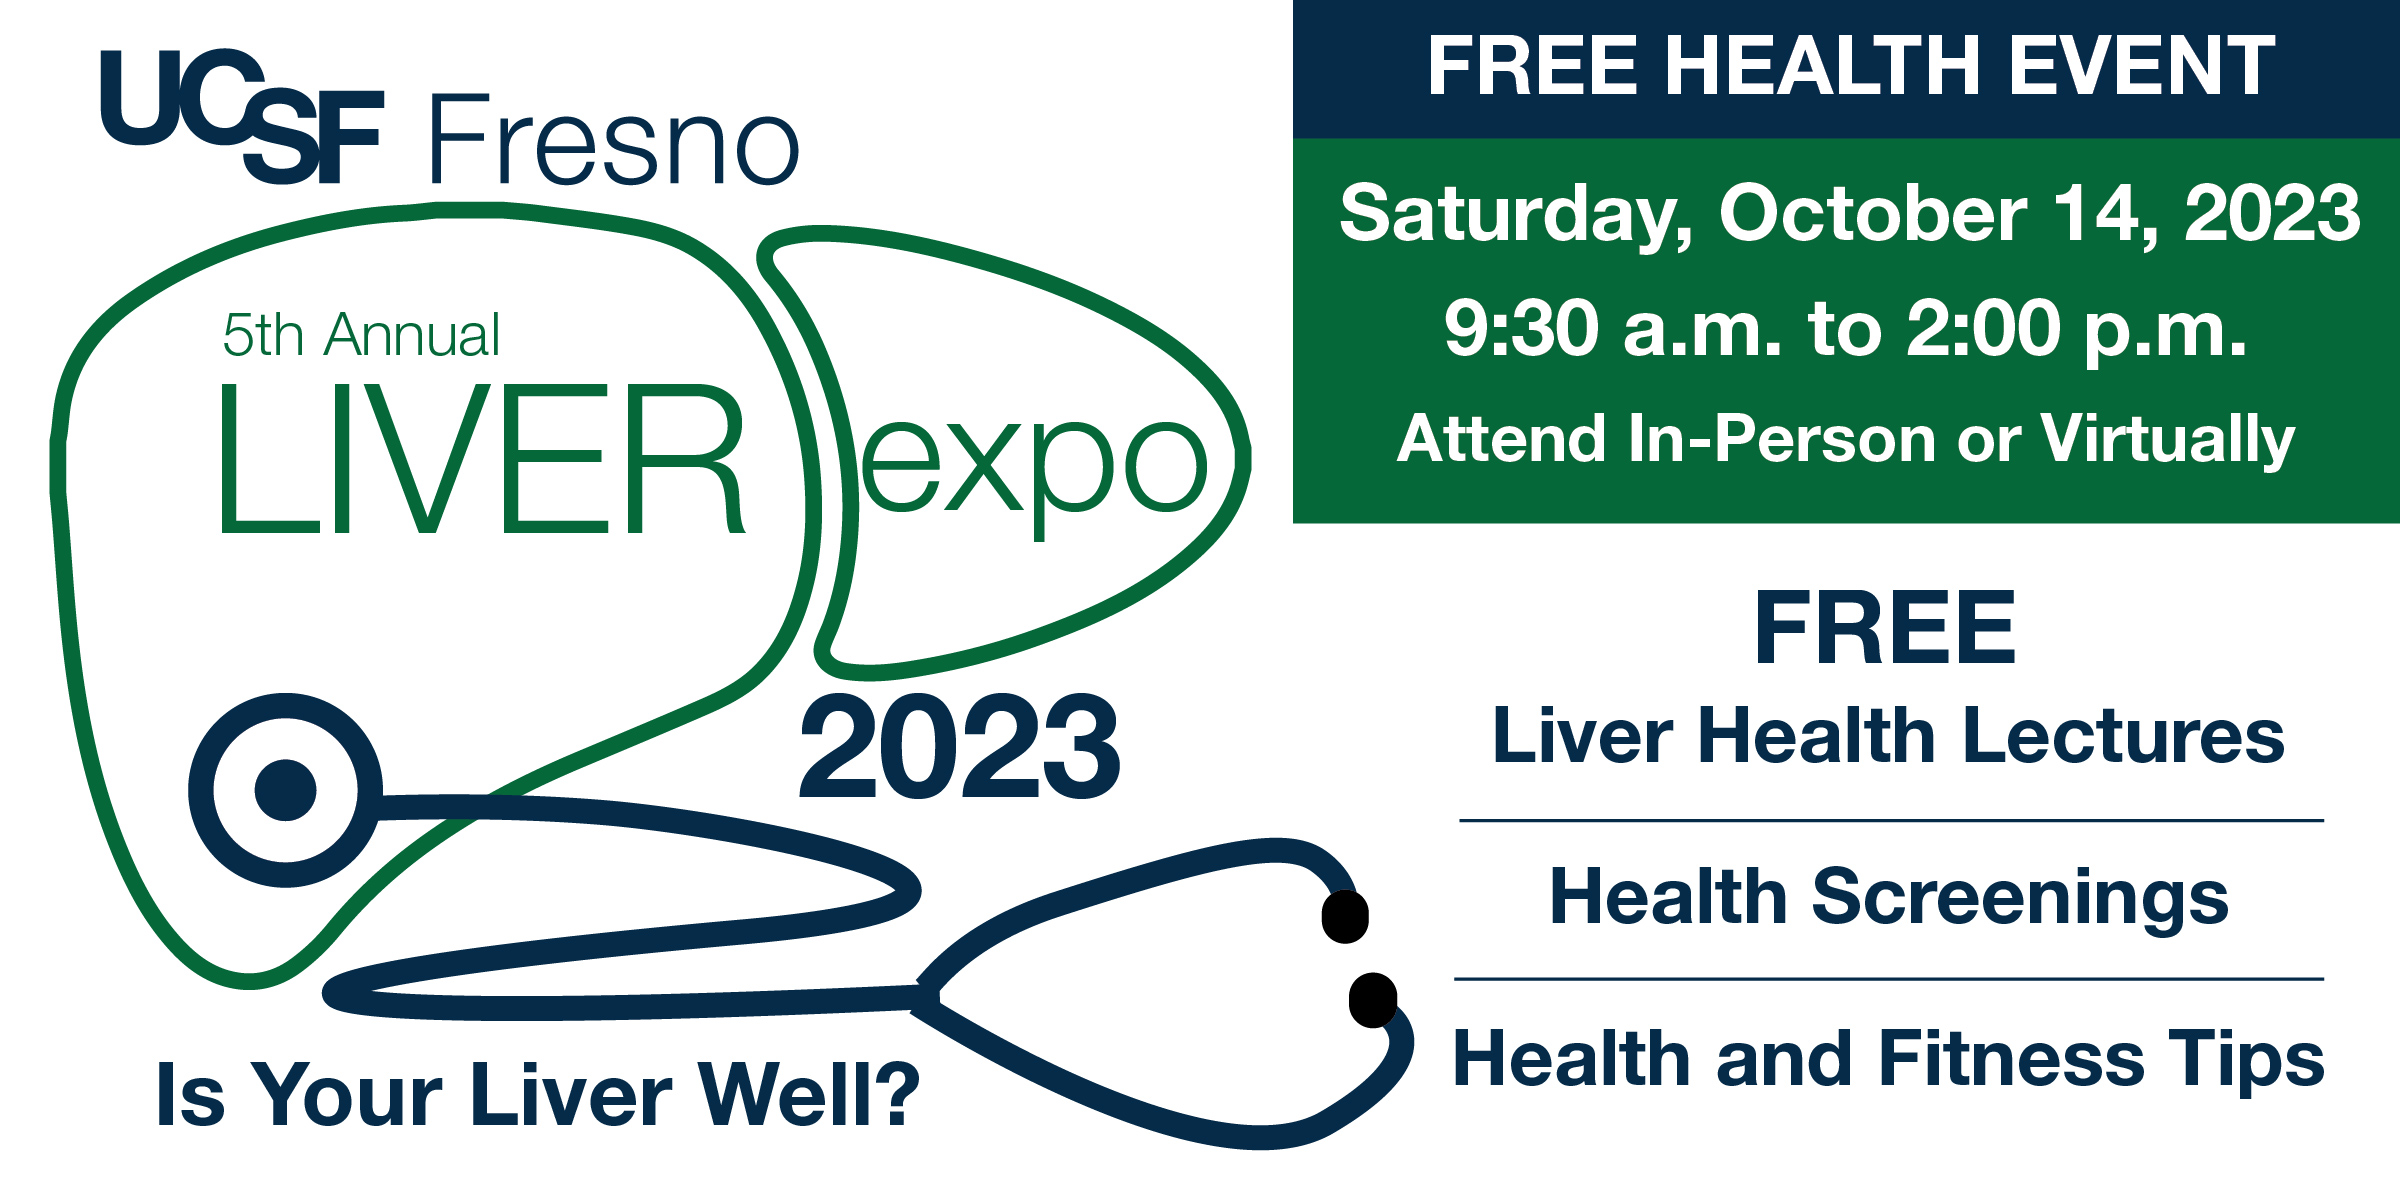 2023 Liver Expo Flyer